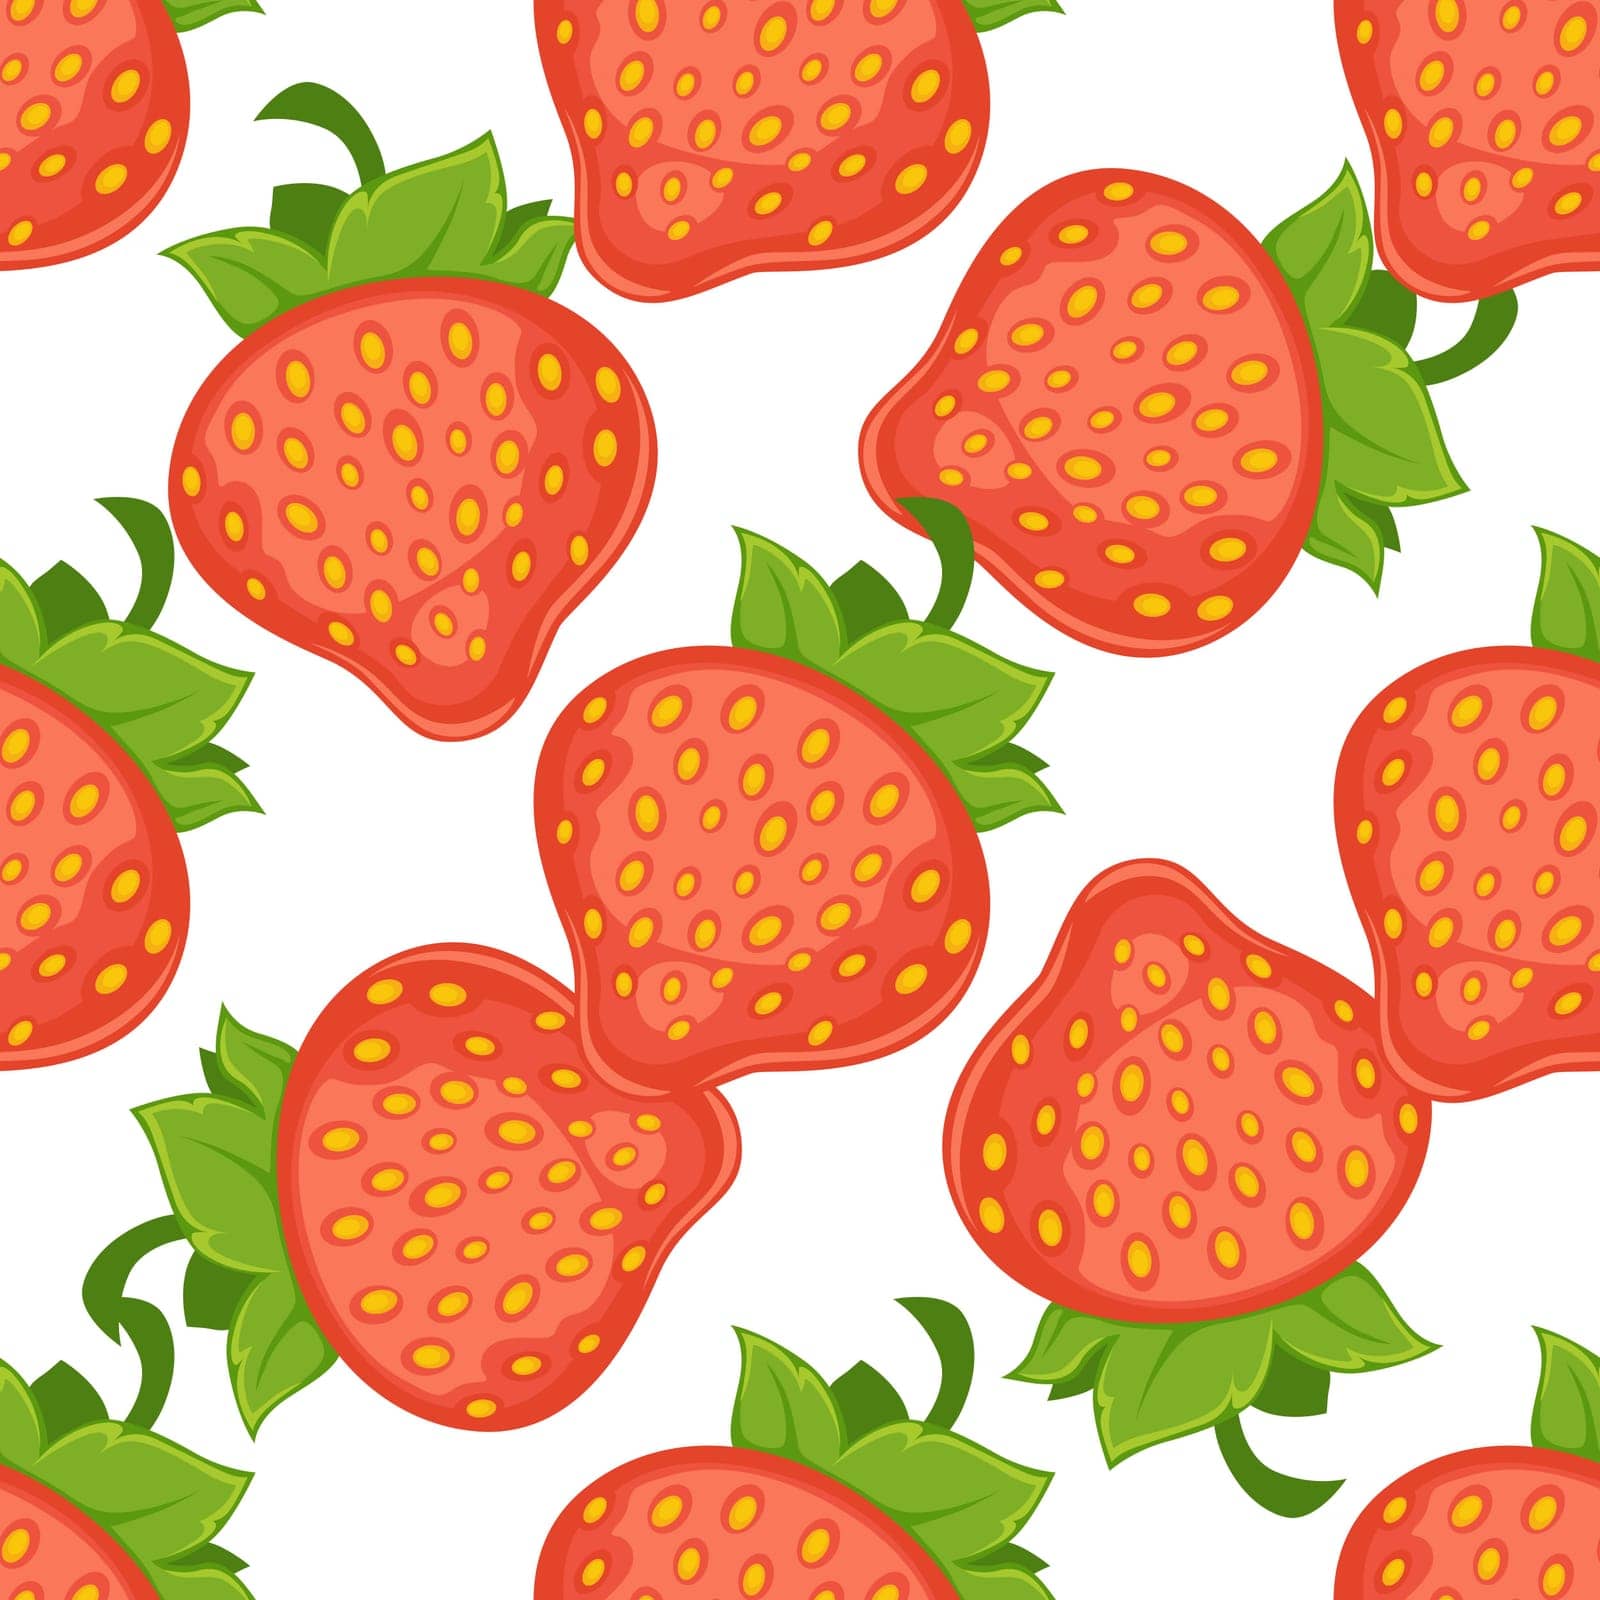 Vector Strawberry Seamless Pattern featuring a repeating background with a set of cut-out illustrations of fruity strawberries with green leaves. A collection of strawberry still lifes on a white background, perfect for wrapping paper.